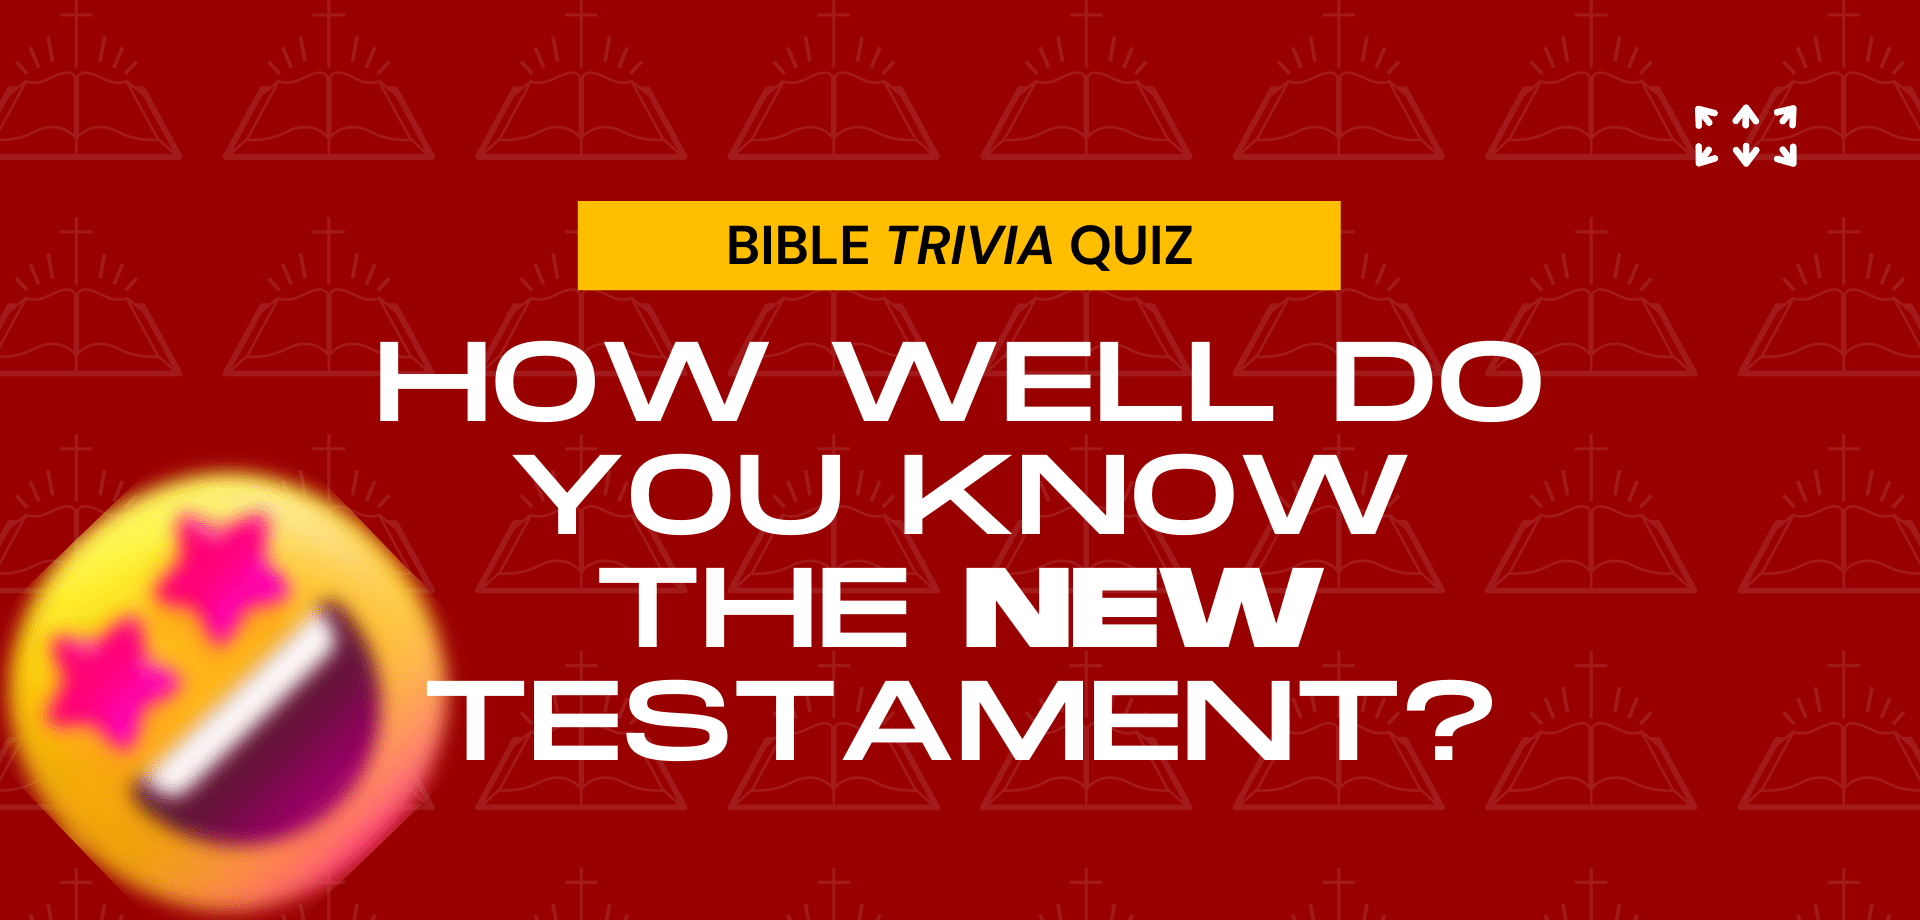 HOW WELL DO YOU KNOW THE NEW TESTAMENT